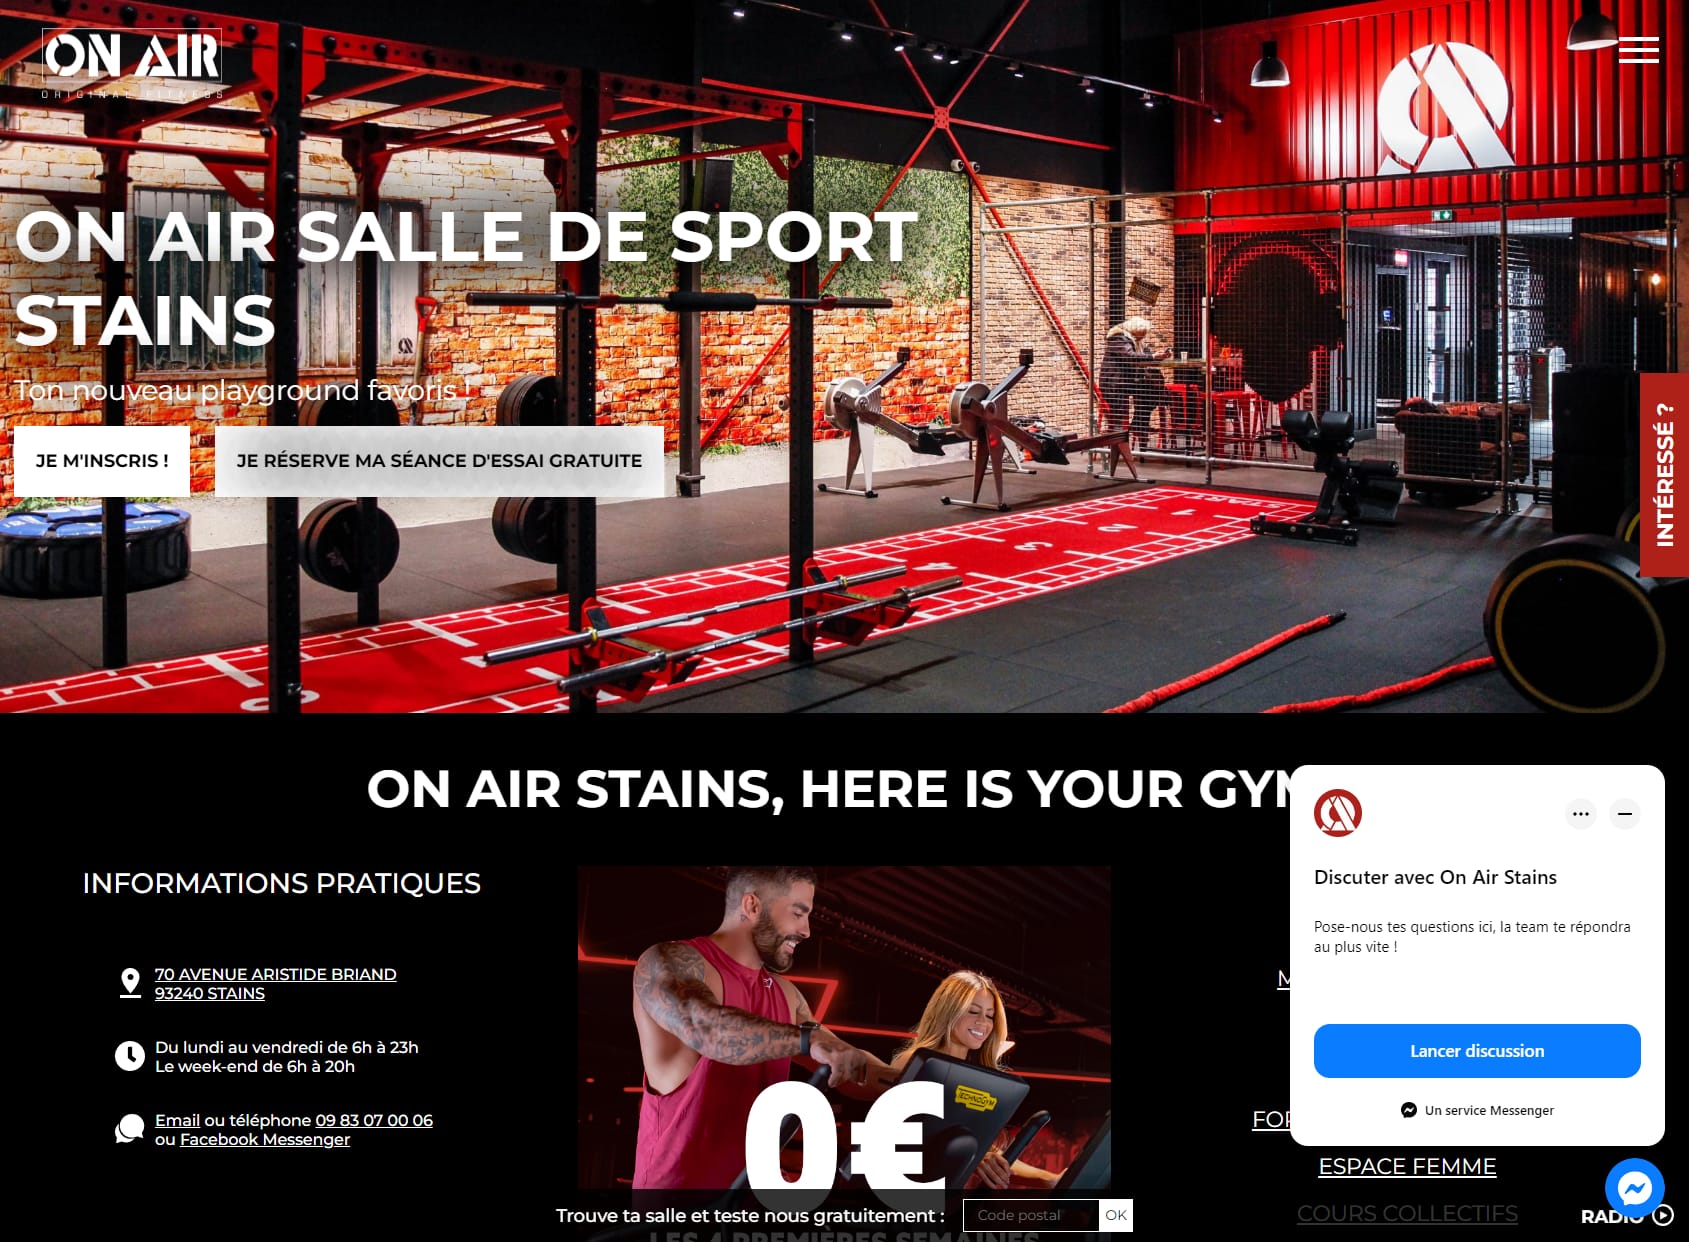 Salle de sport - ON AIR STAINS